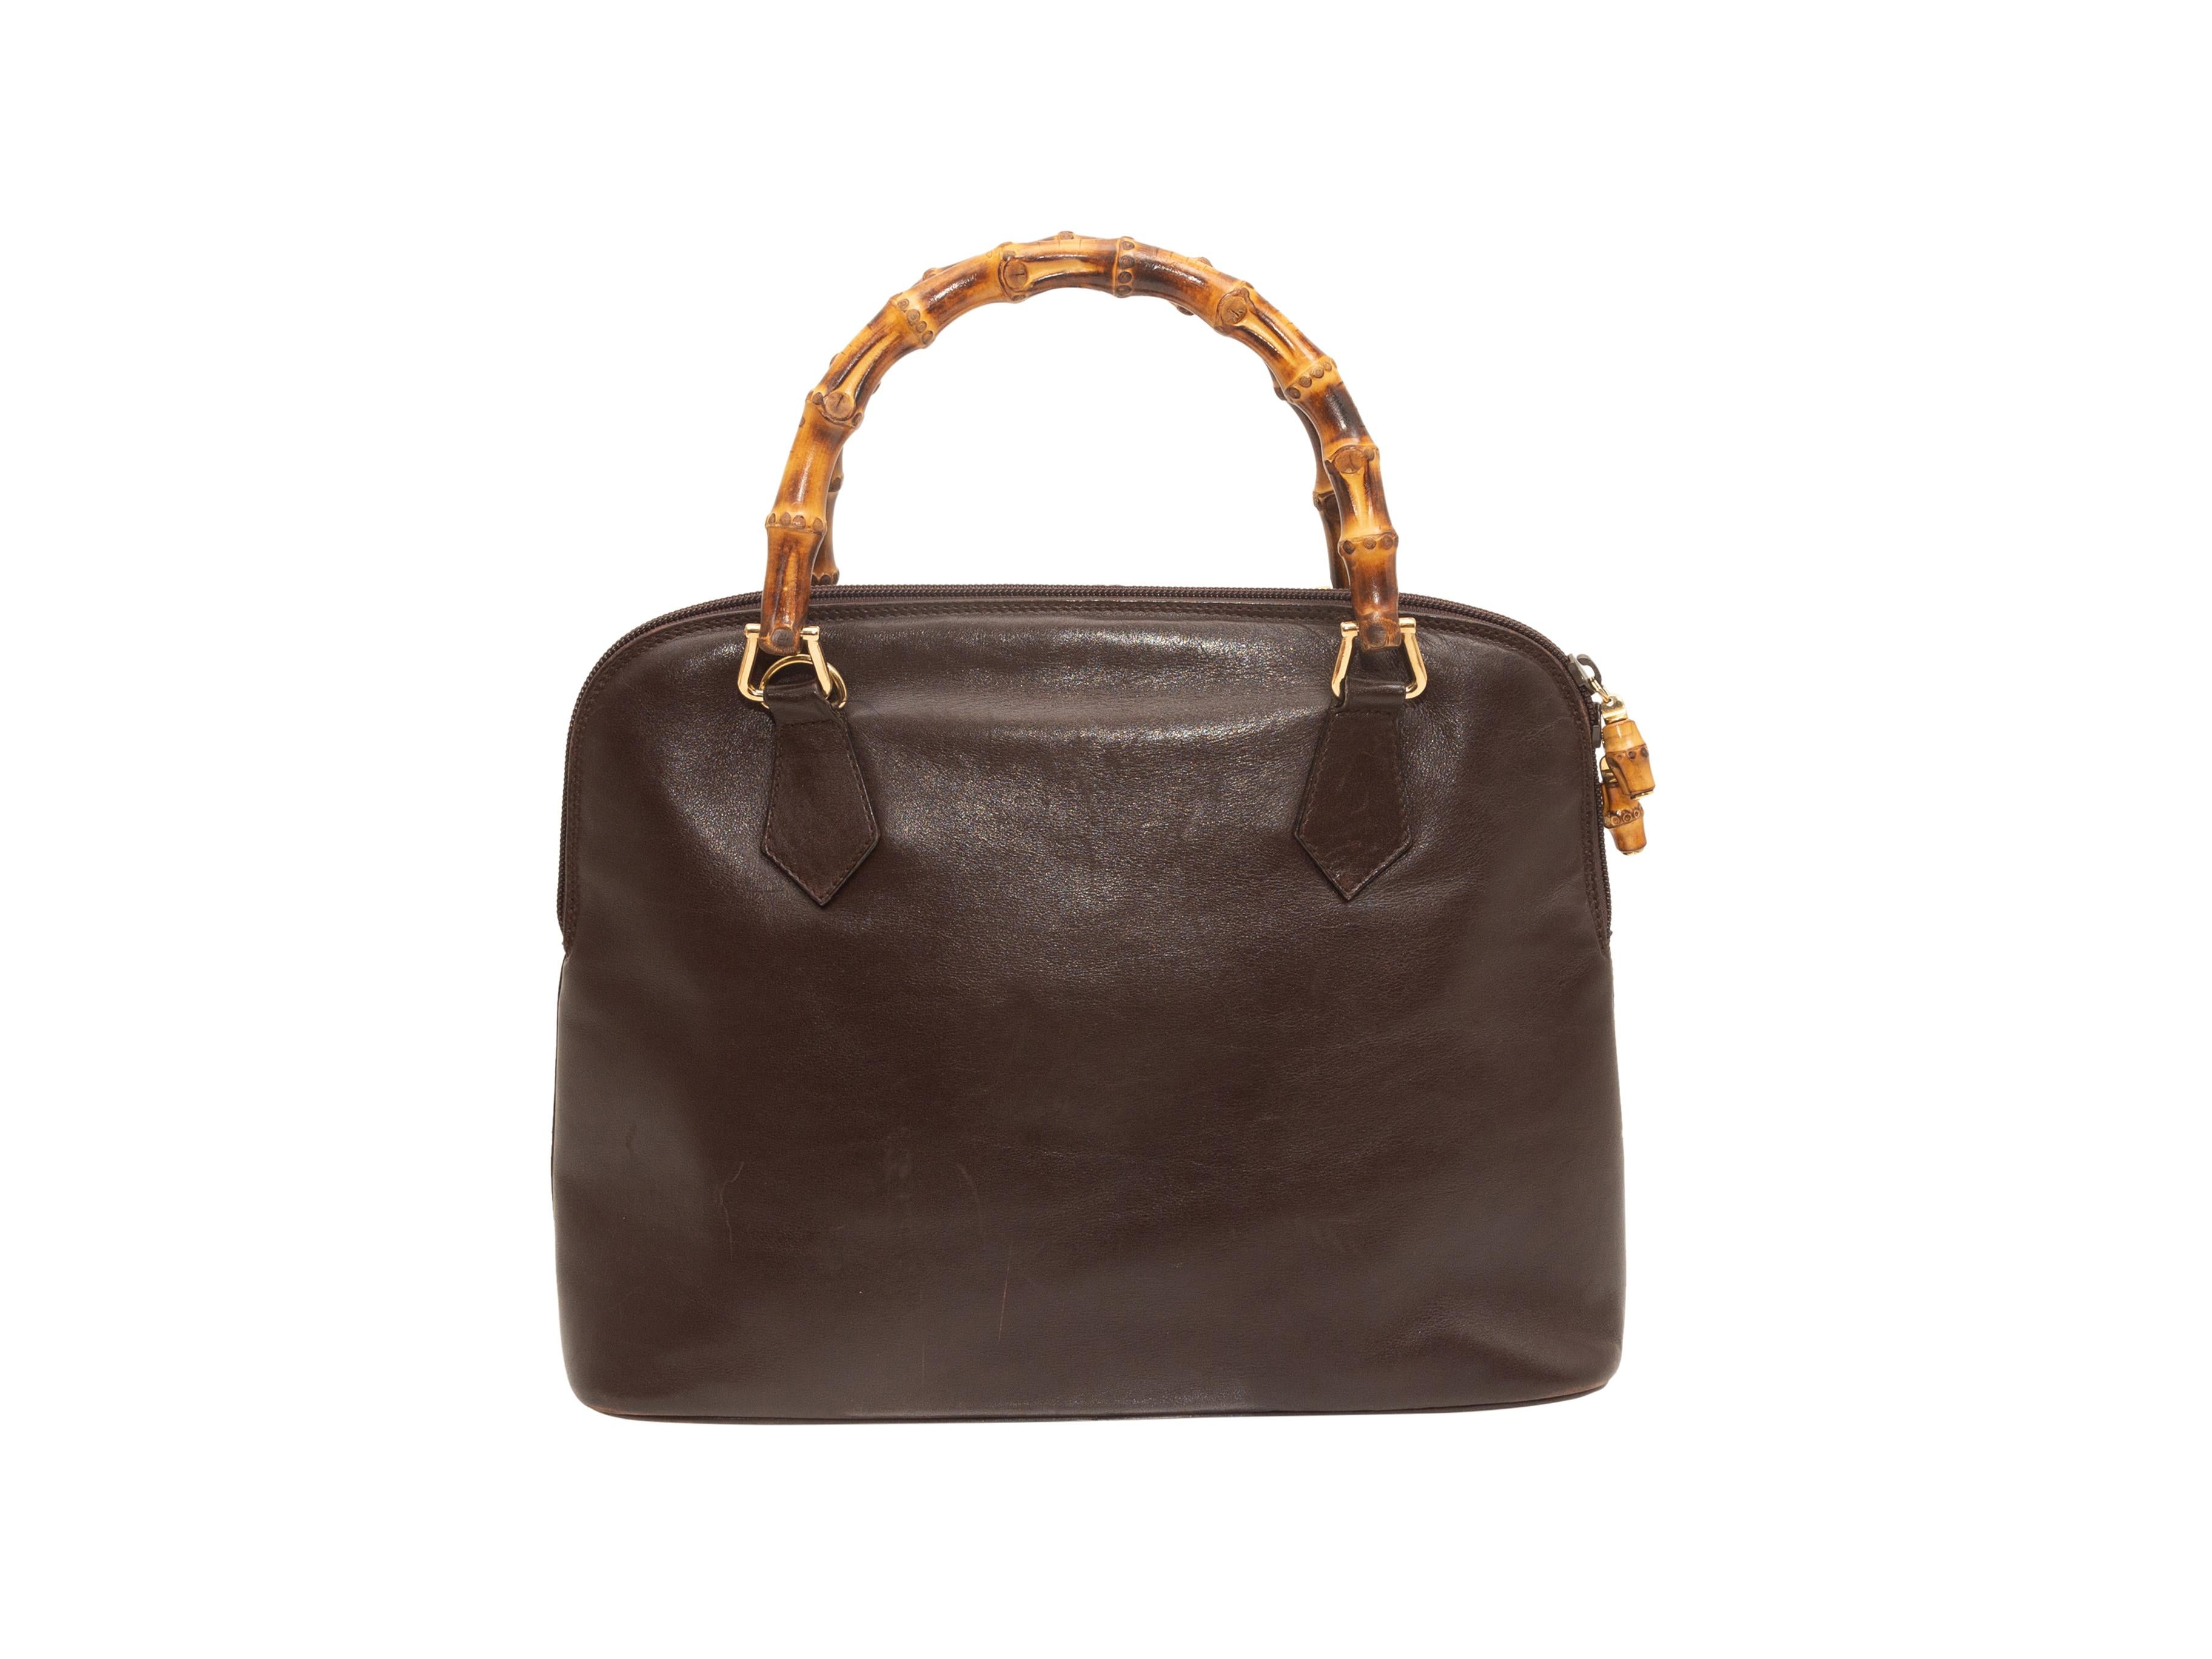 Product details: Vintage brown leather handbag by Gucci. Gold-tone hardware. Dual bamboo top handles. Zip closure at top. 12.5